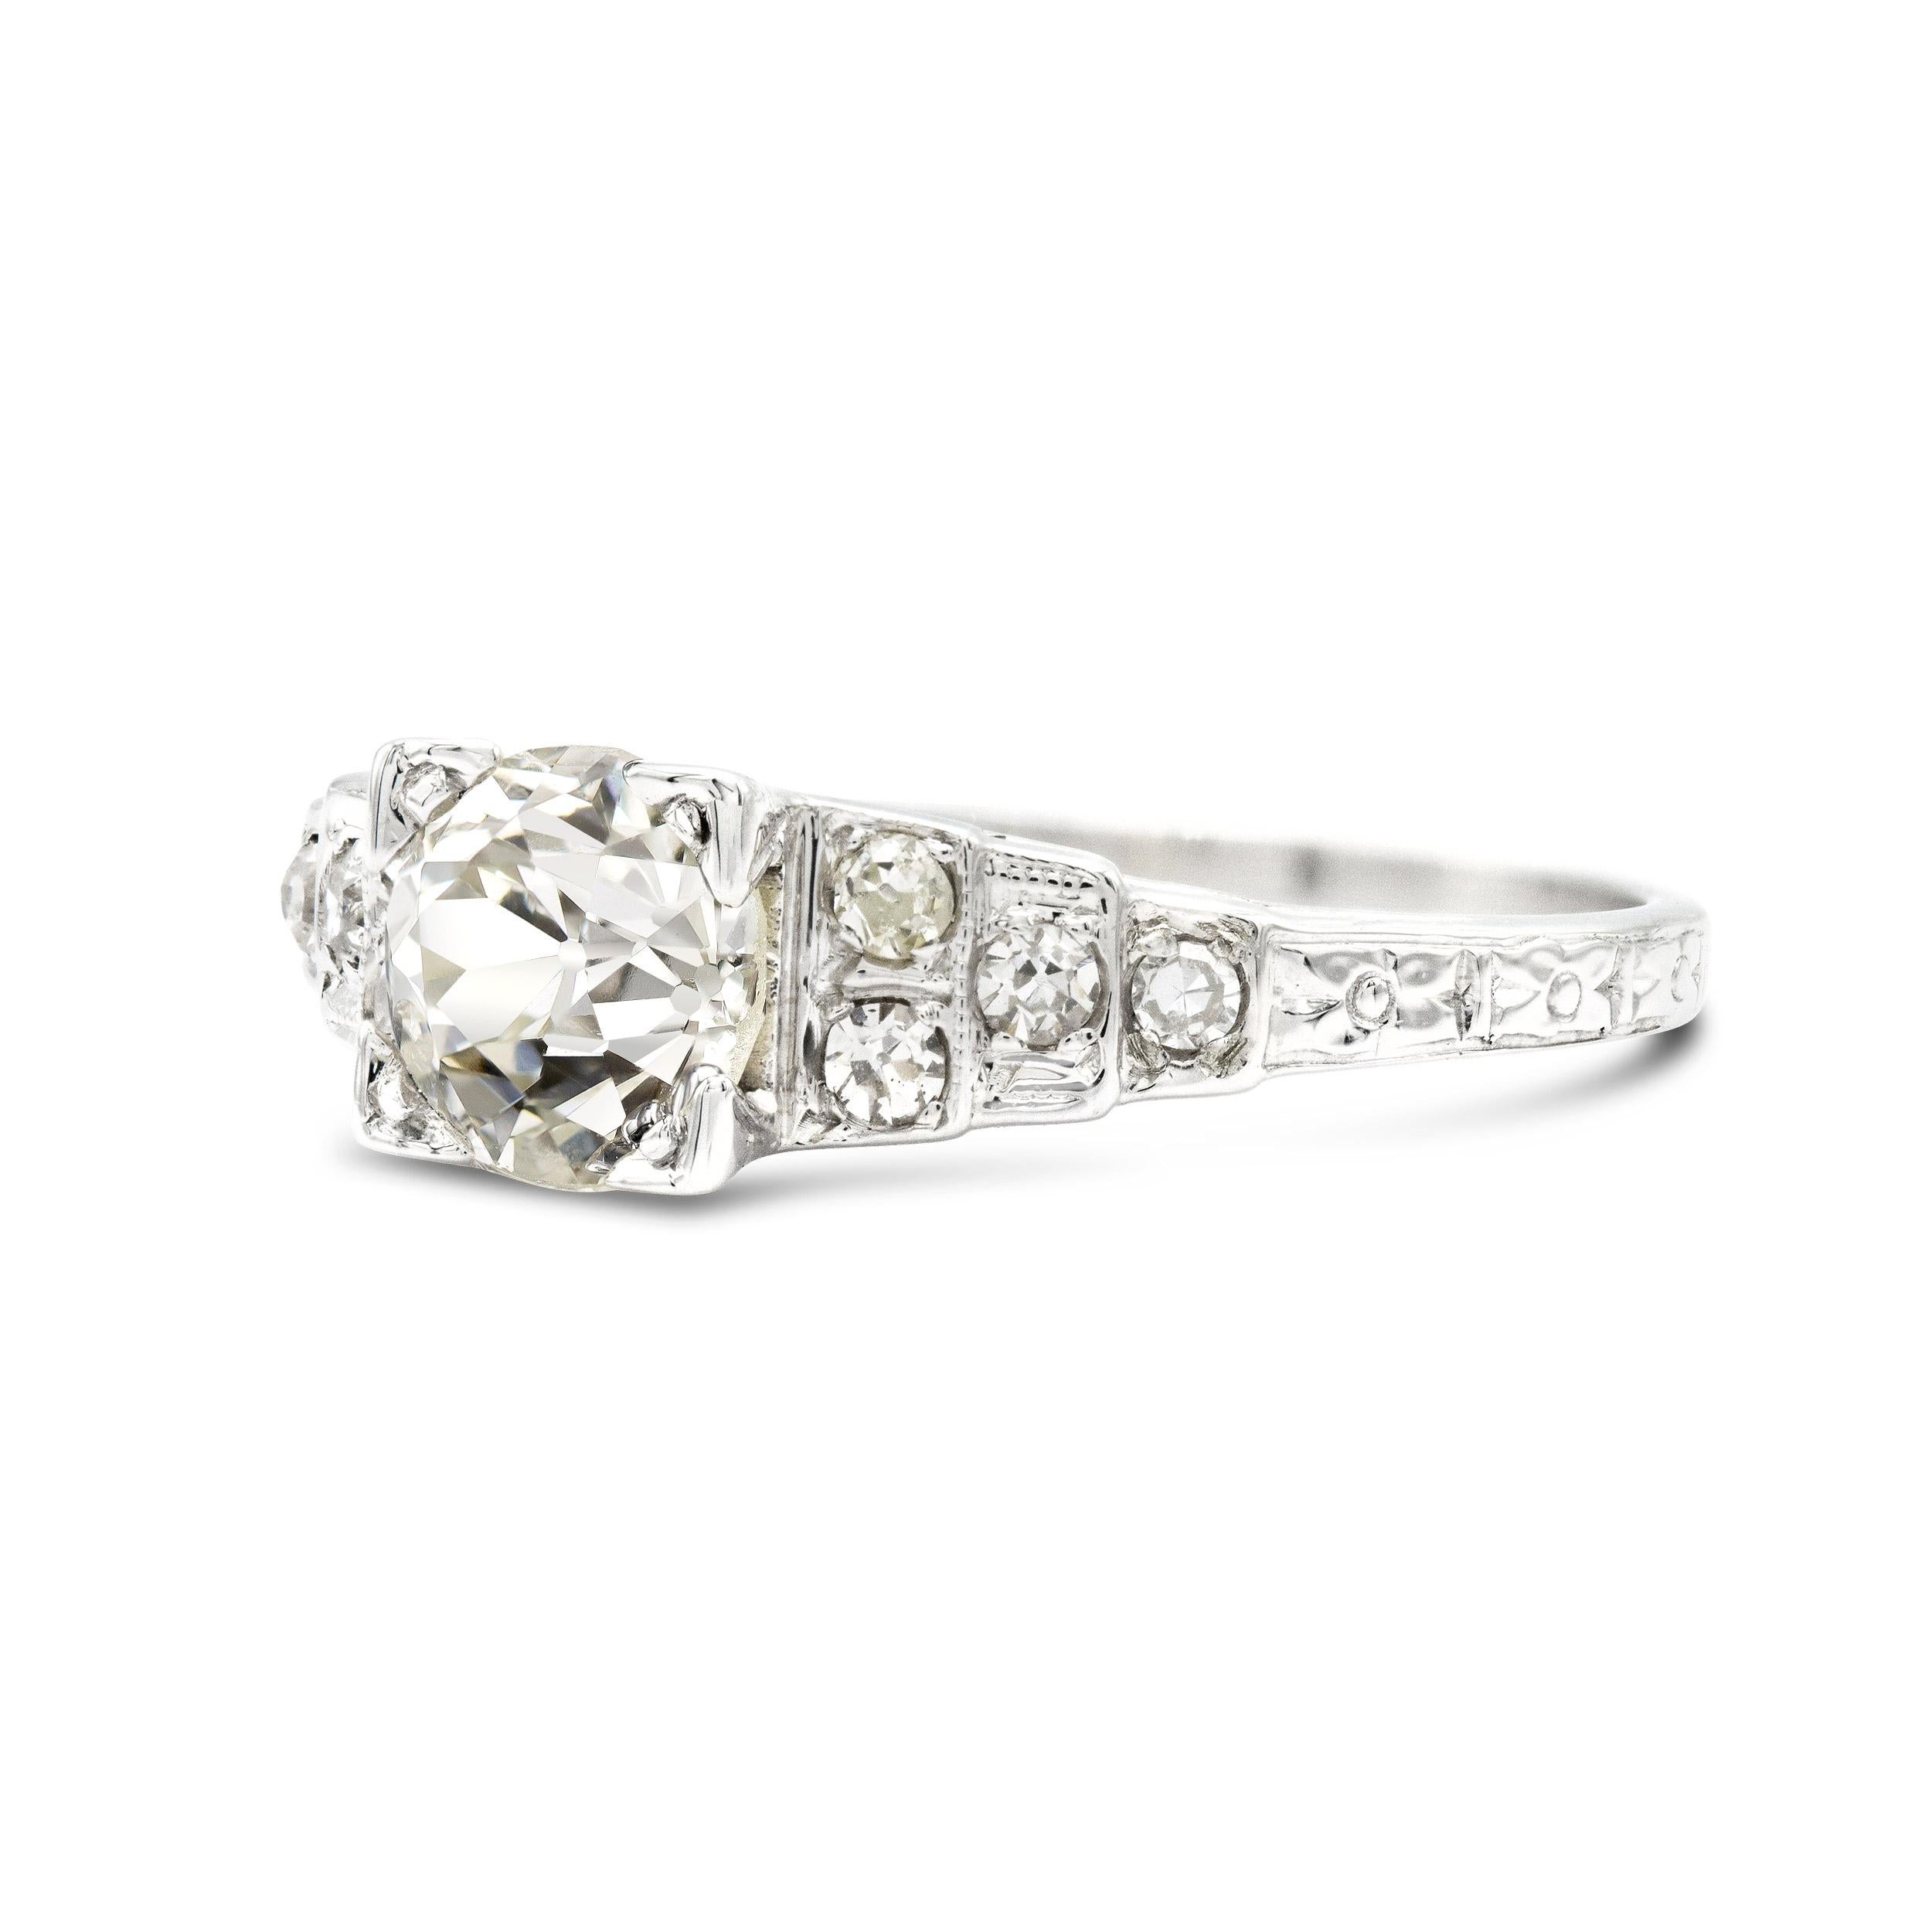 A ring that has all the distinguishing features of the era it comes from. A 0.87 carat old Euro in an illusion setting centers this sweet Art Deco engagement ring. We especially love the graduated shoulders studded with super bright single cut